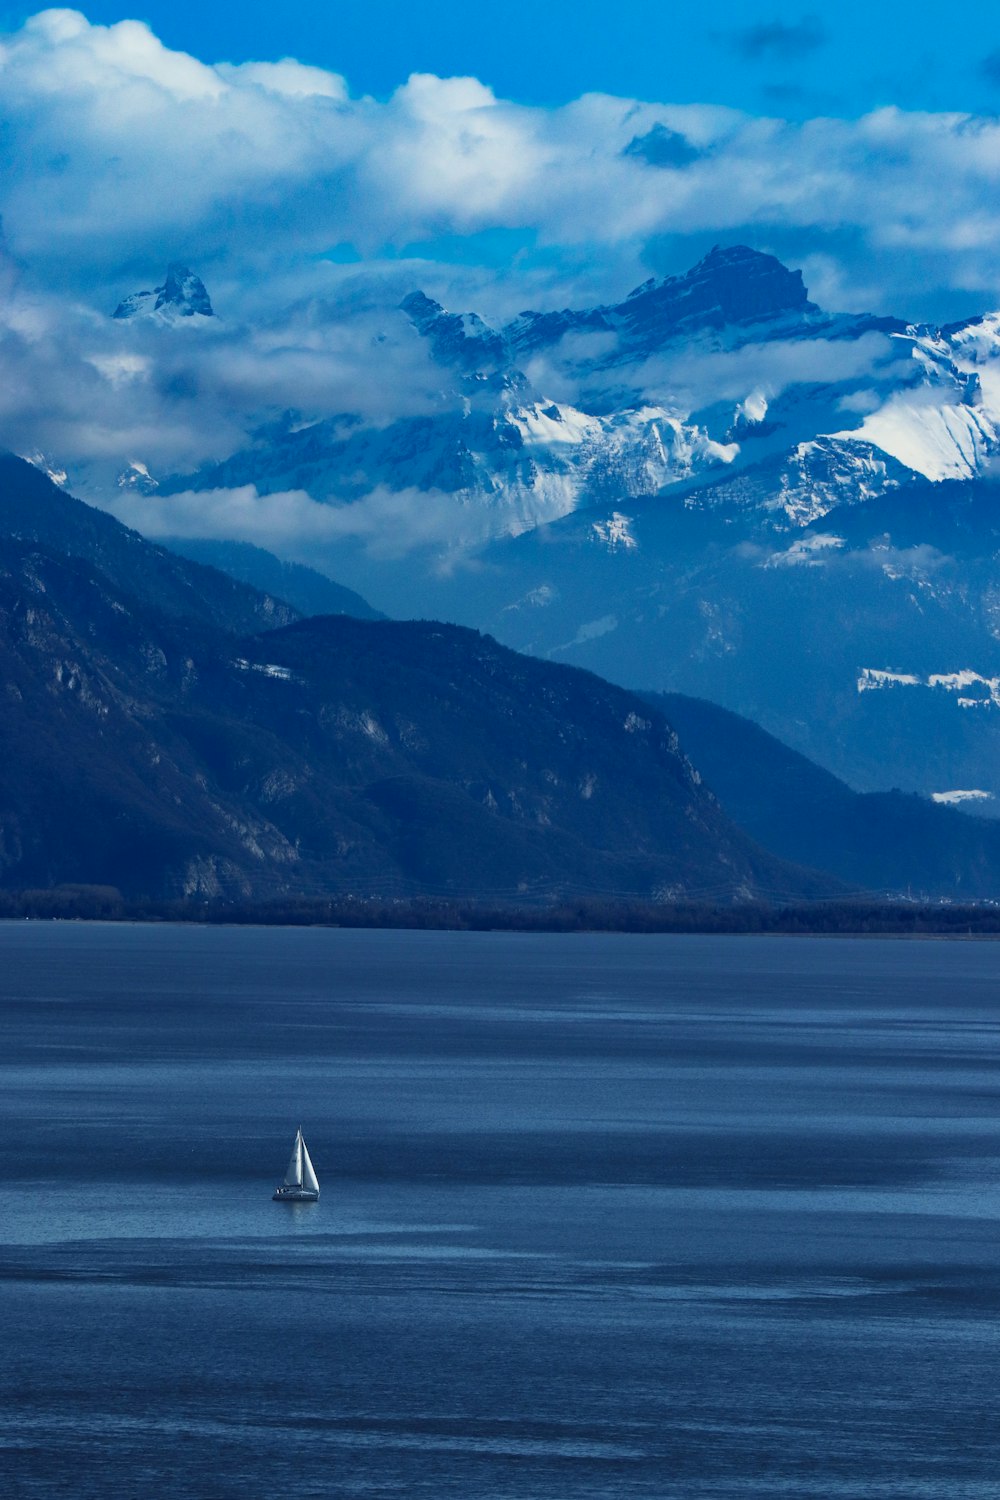 a sailboat in a large body of water with mountains in the background